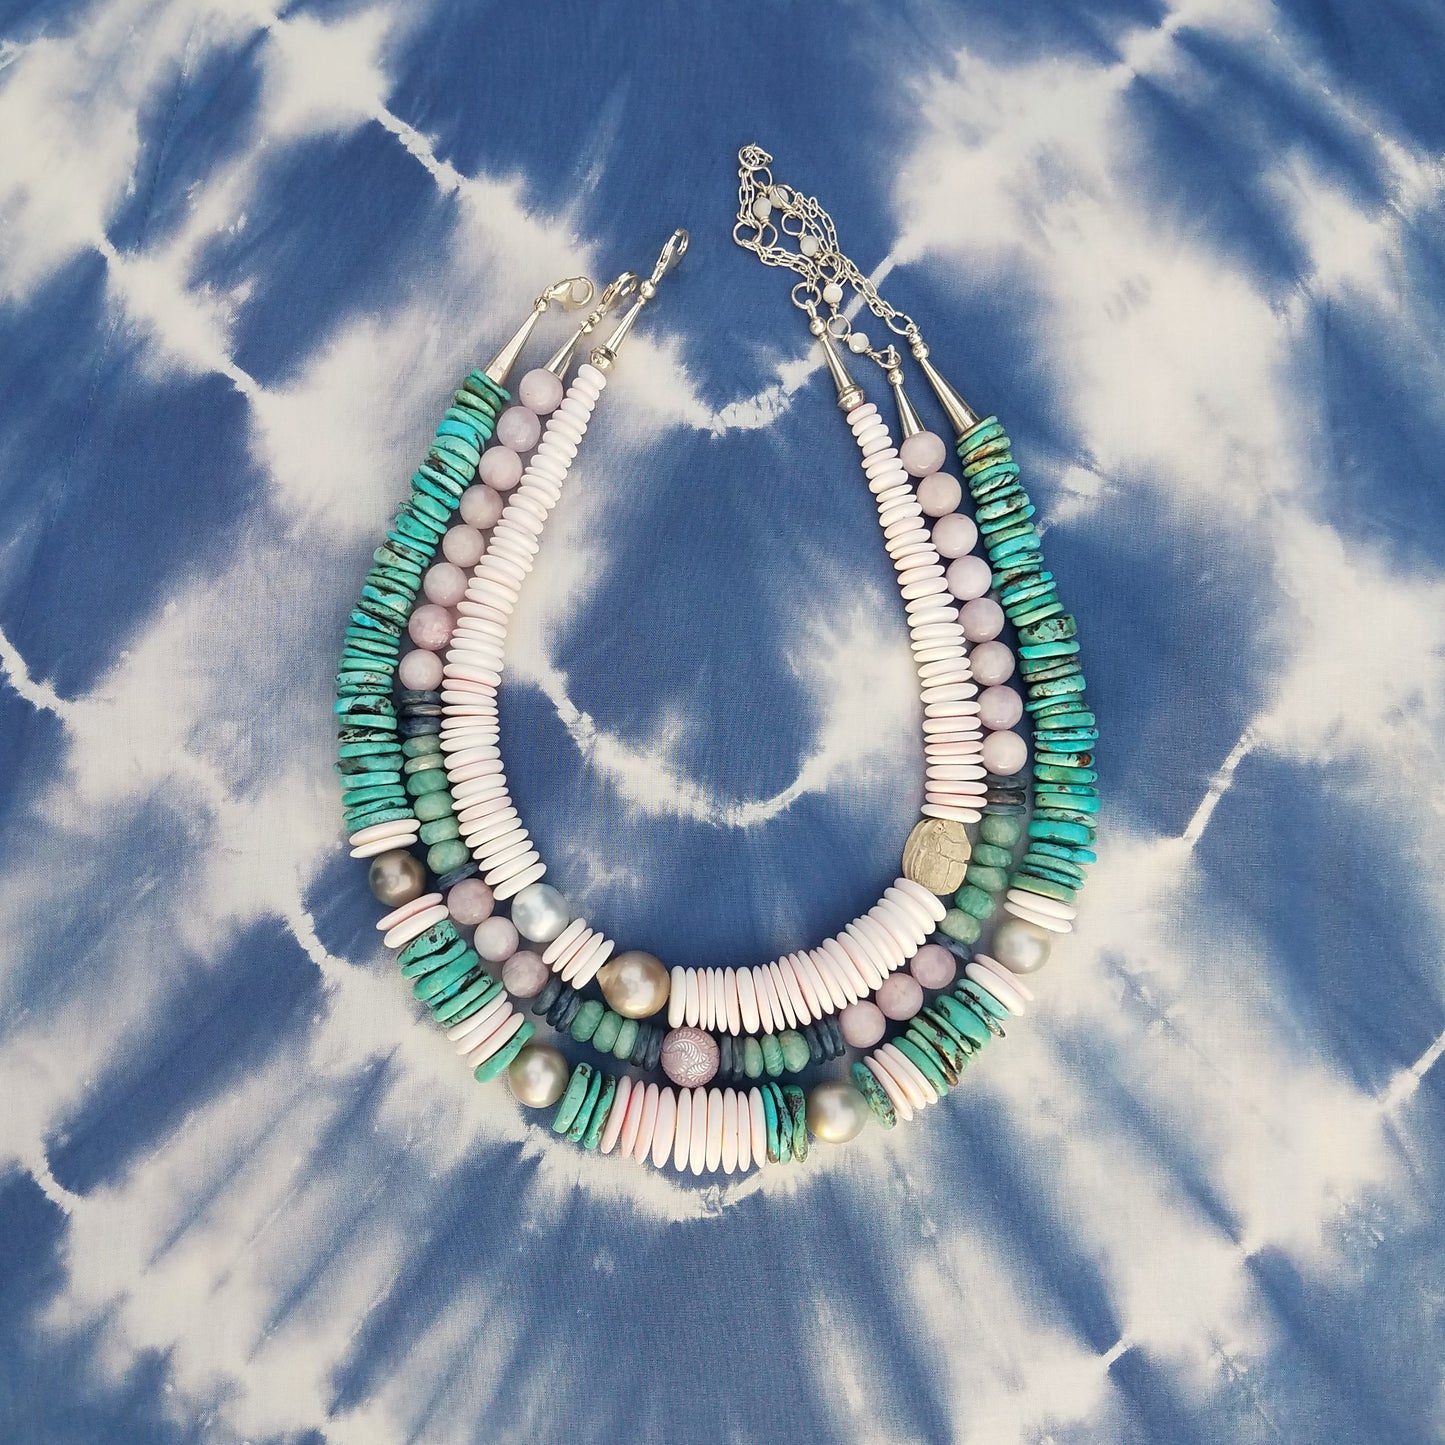 Turquoise & Conch Shell Necklace